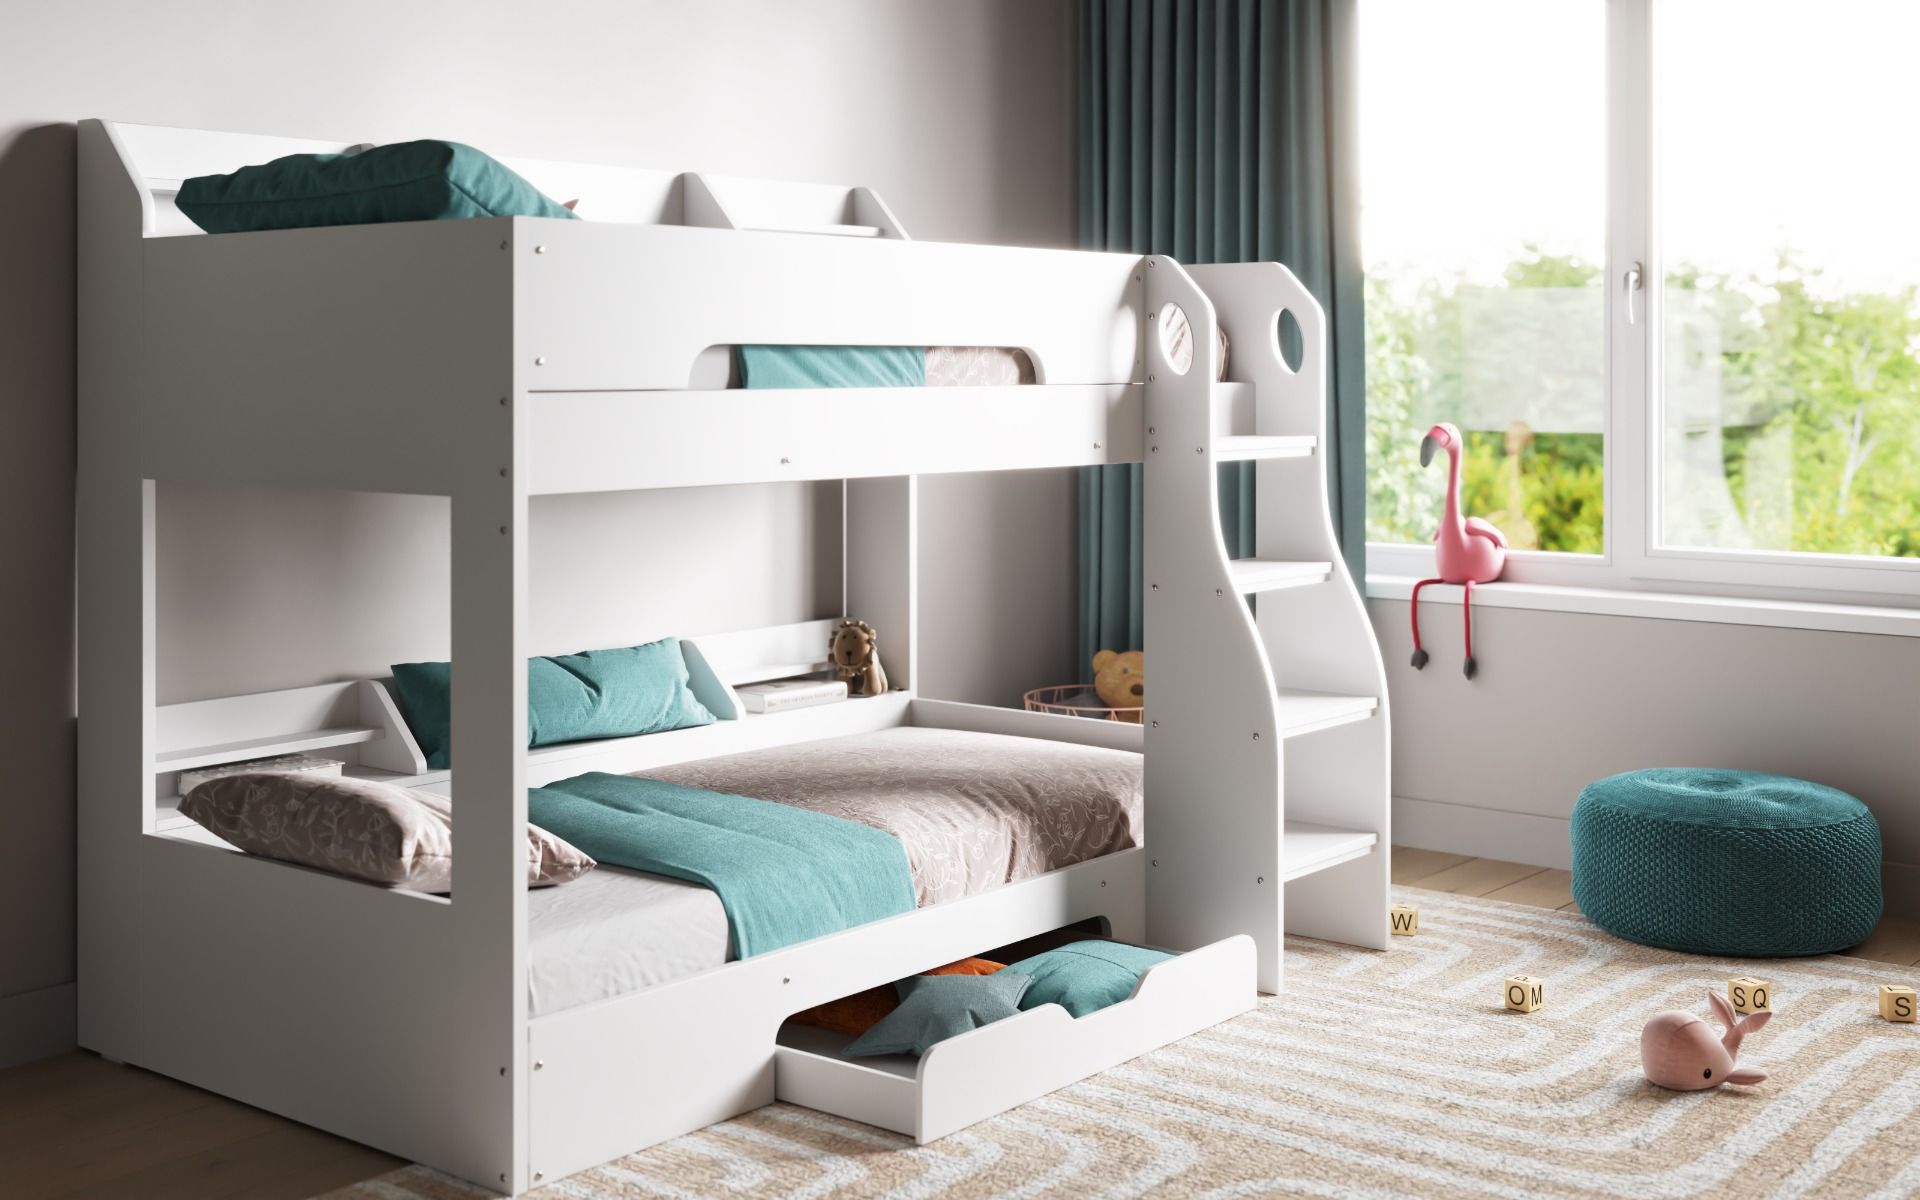 Flair Flick Bunk Bed with Shelves and Drawer - White